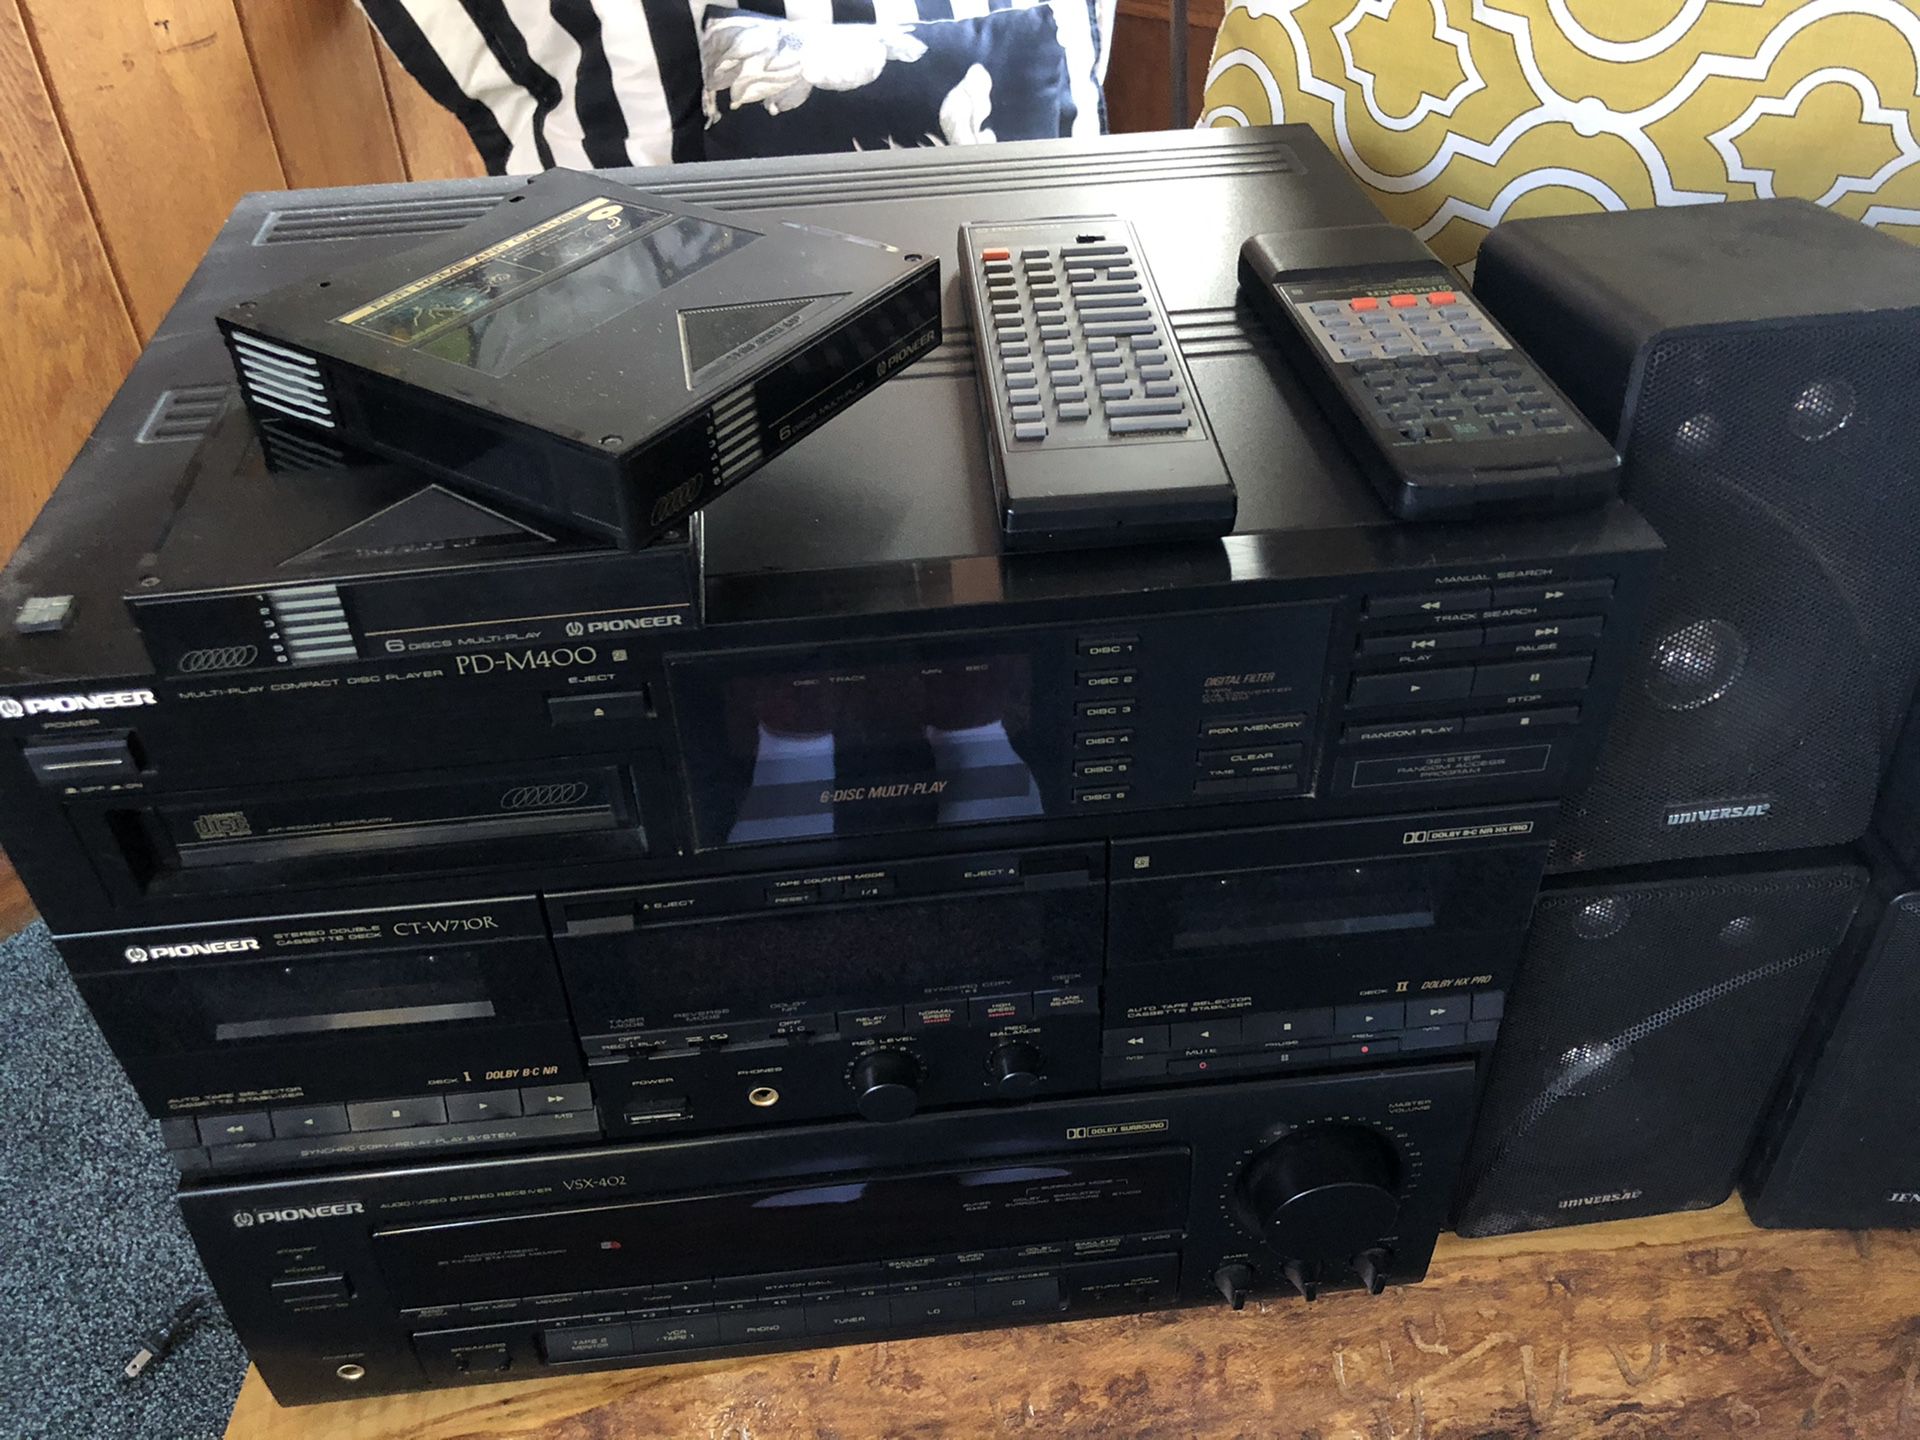 Pioneer cassette deck, stereo receiver, compact desc player with 4 speakers